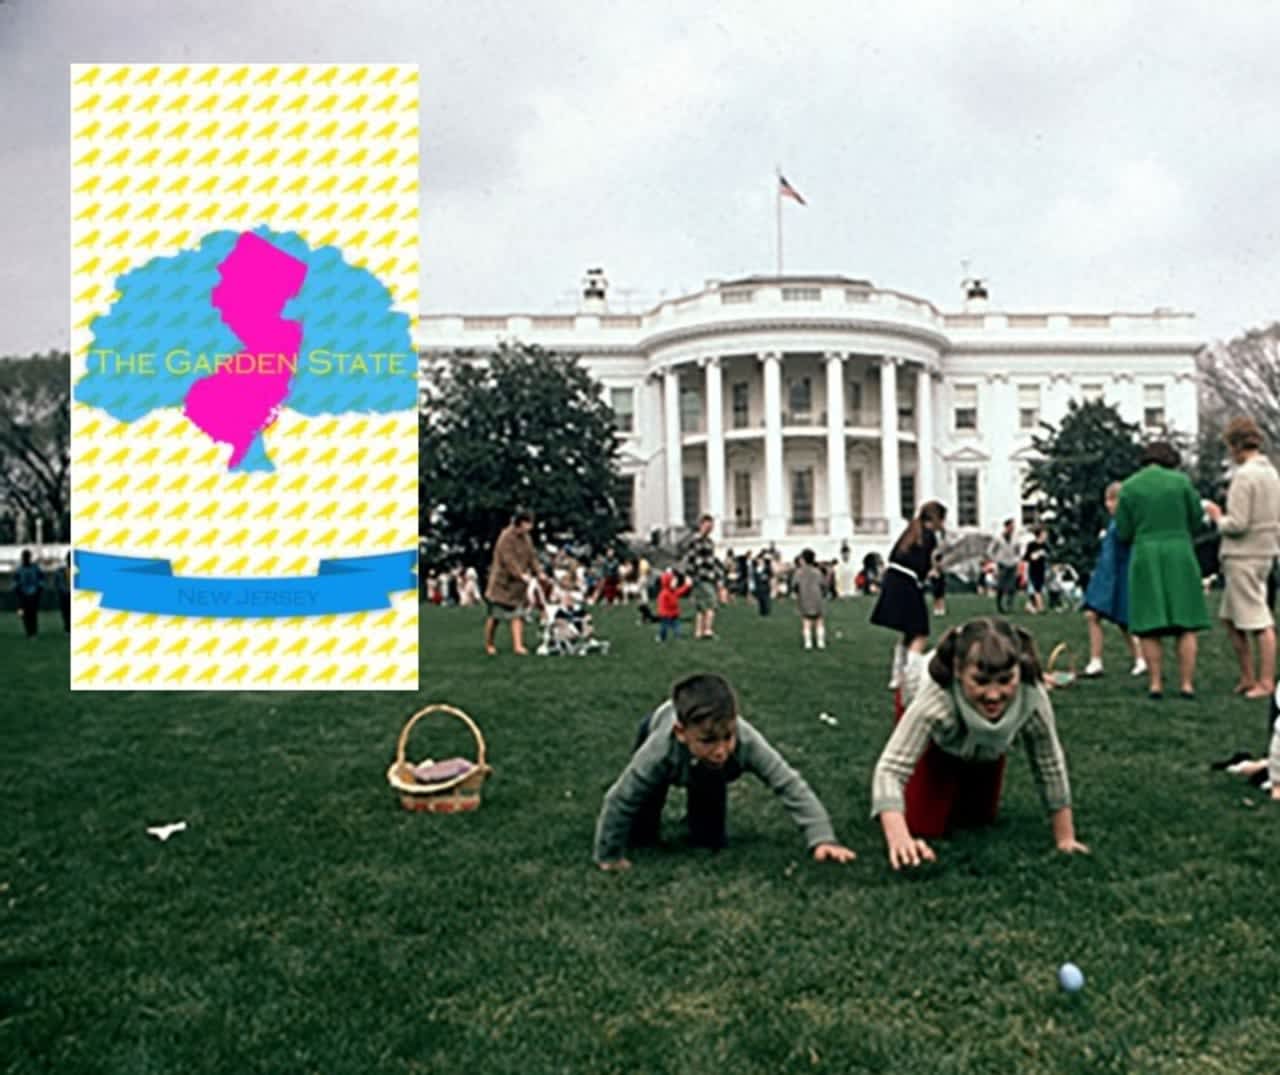 Hackensack High School student Ahmed El Gazzar's design, inset, will represent New Jersey at the White House's 141th Annual Easter Egg Roll. Above photo was taken in 1965.